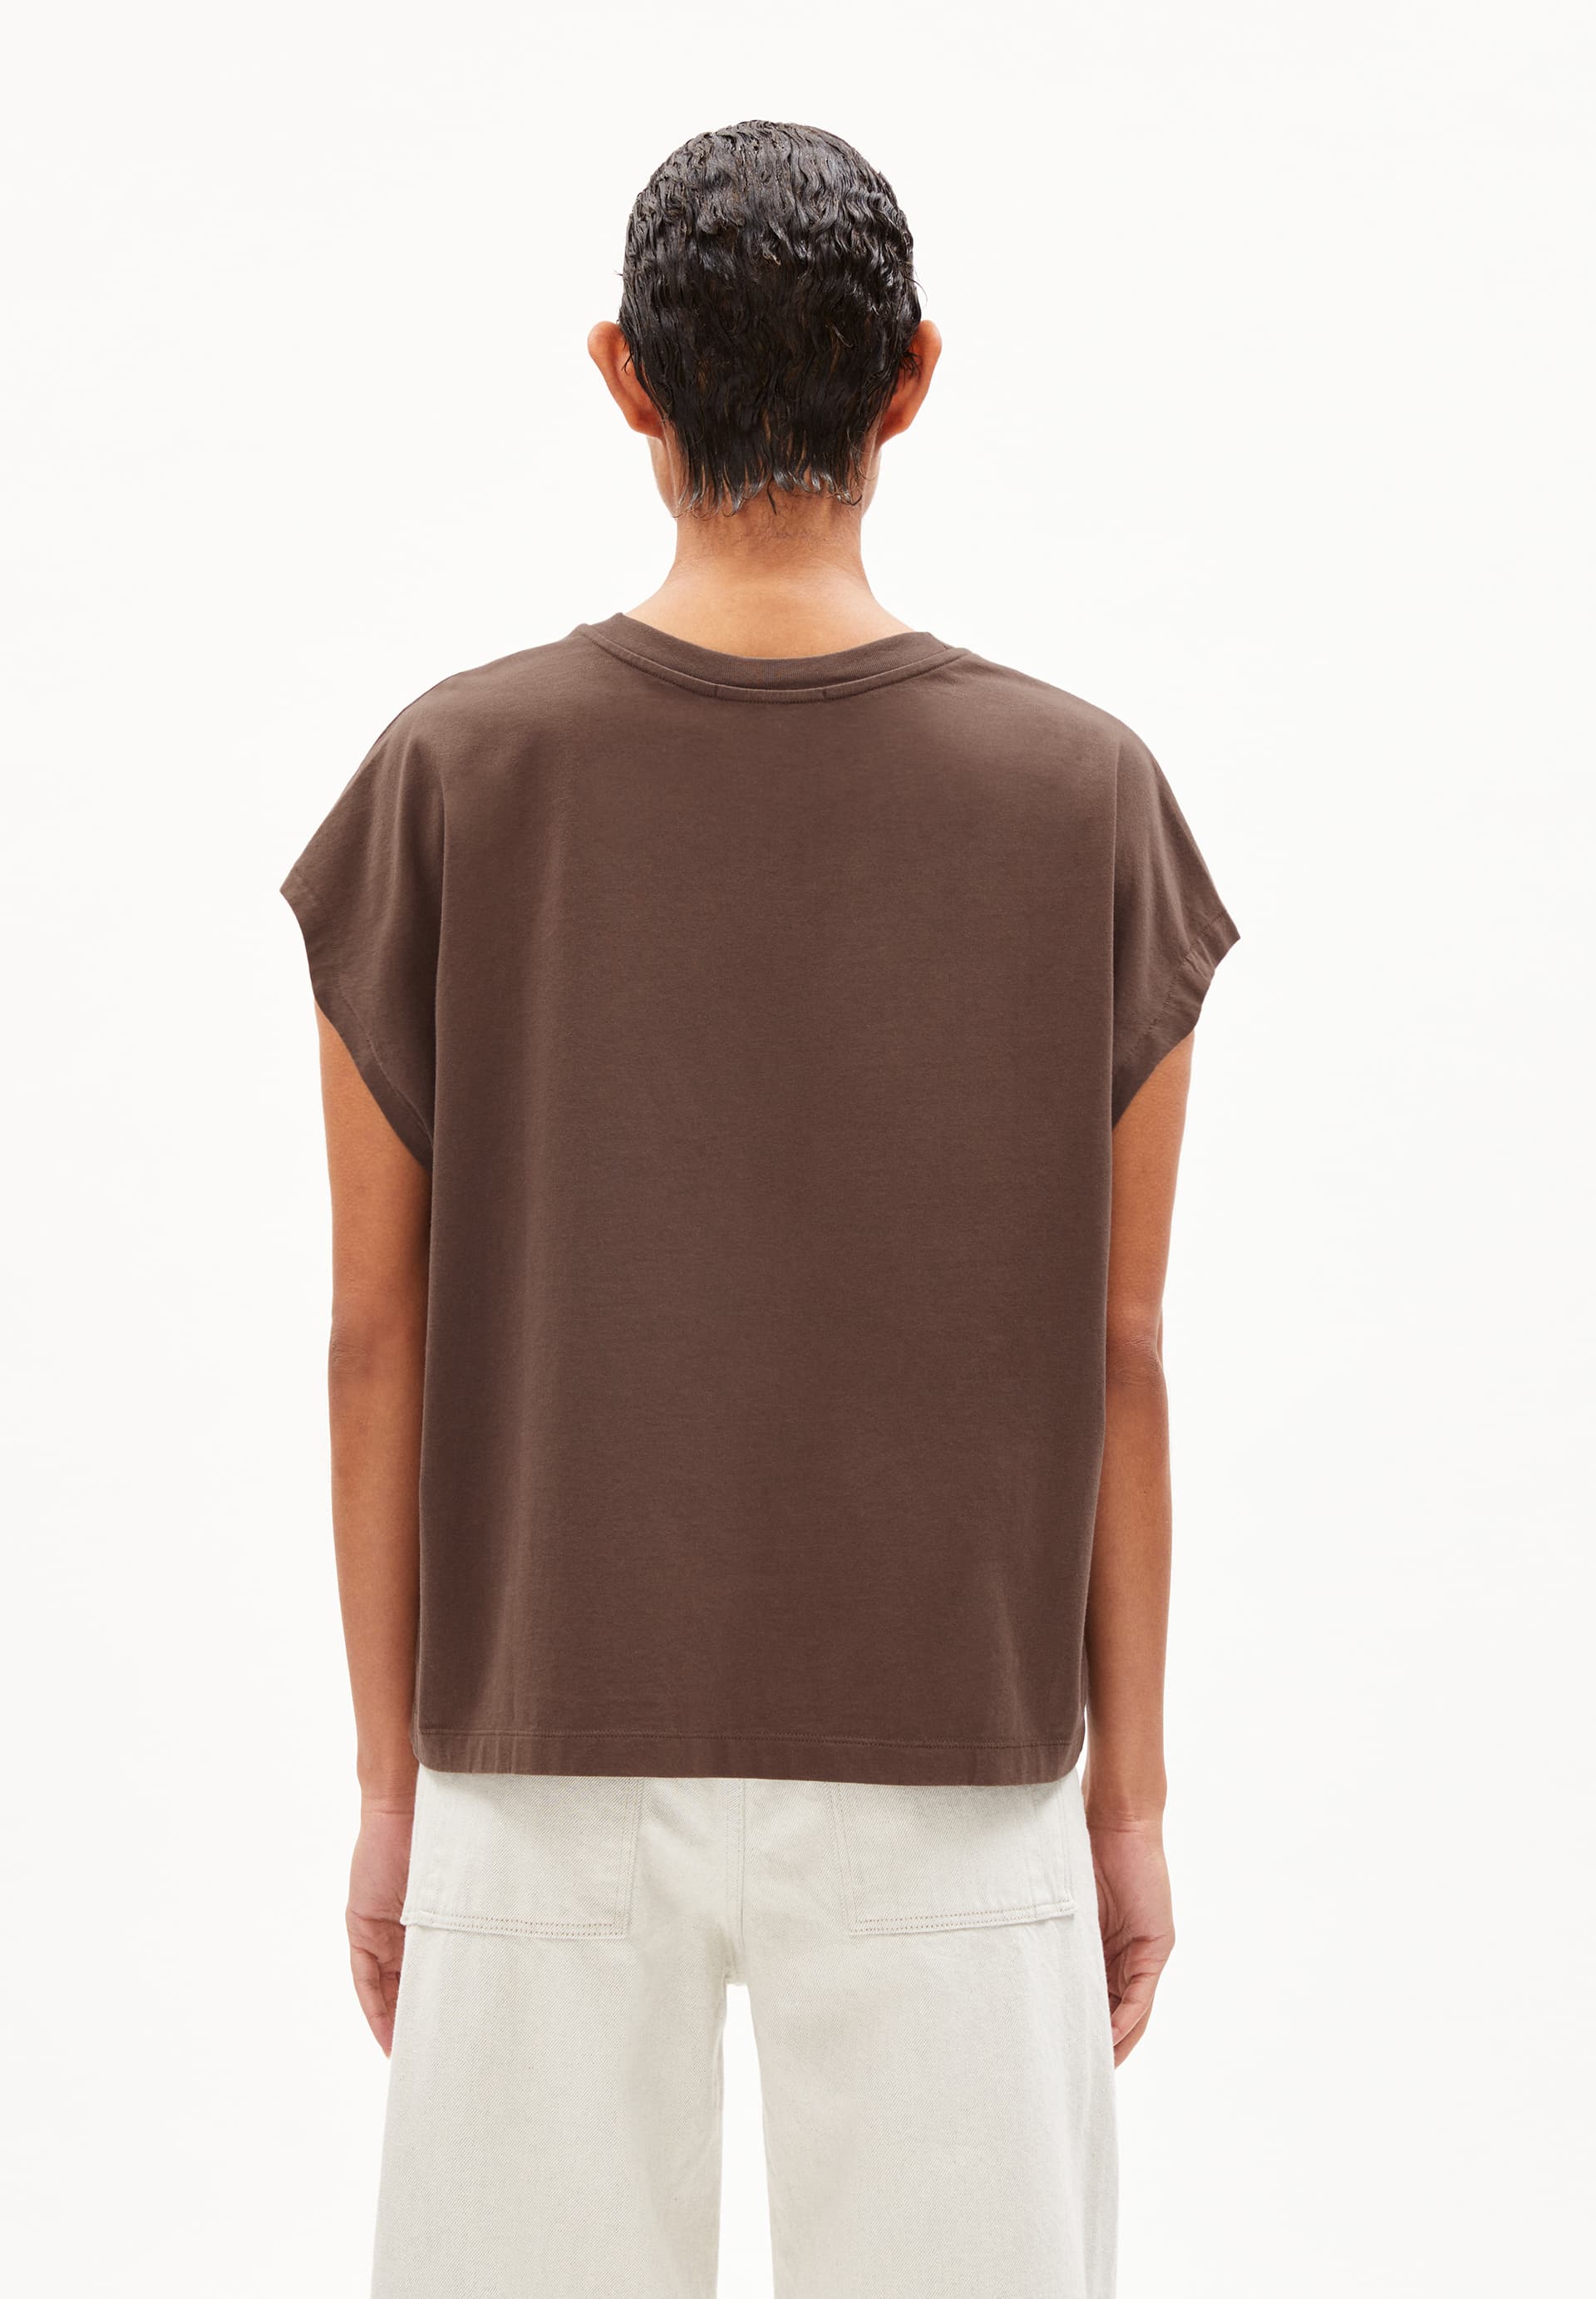 INAARA T-Shirt Oversized Fit made of Organic Cotton